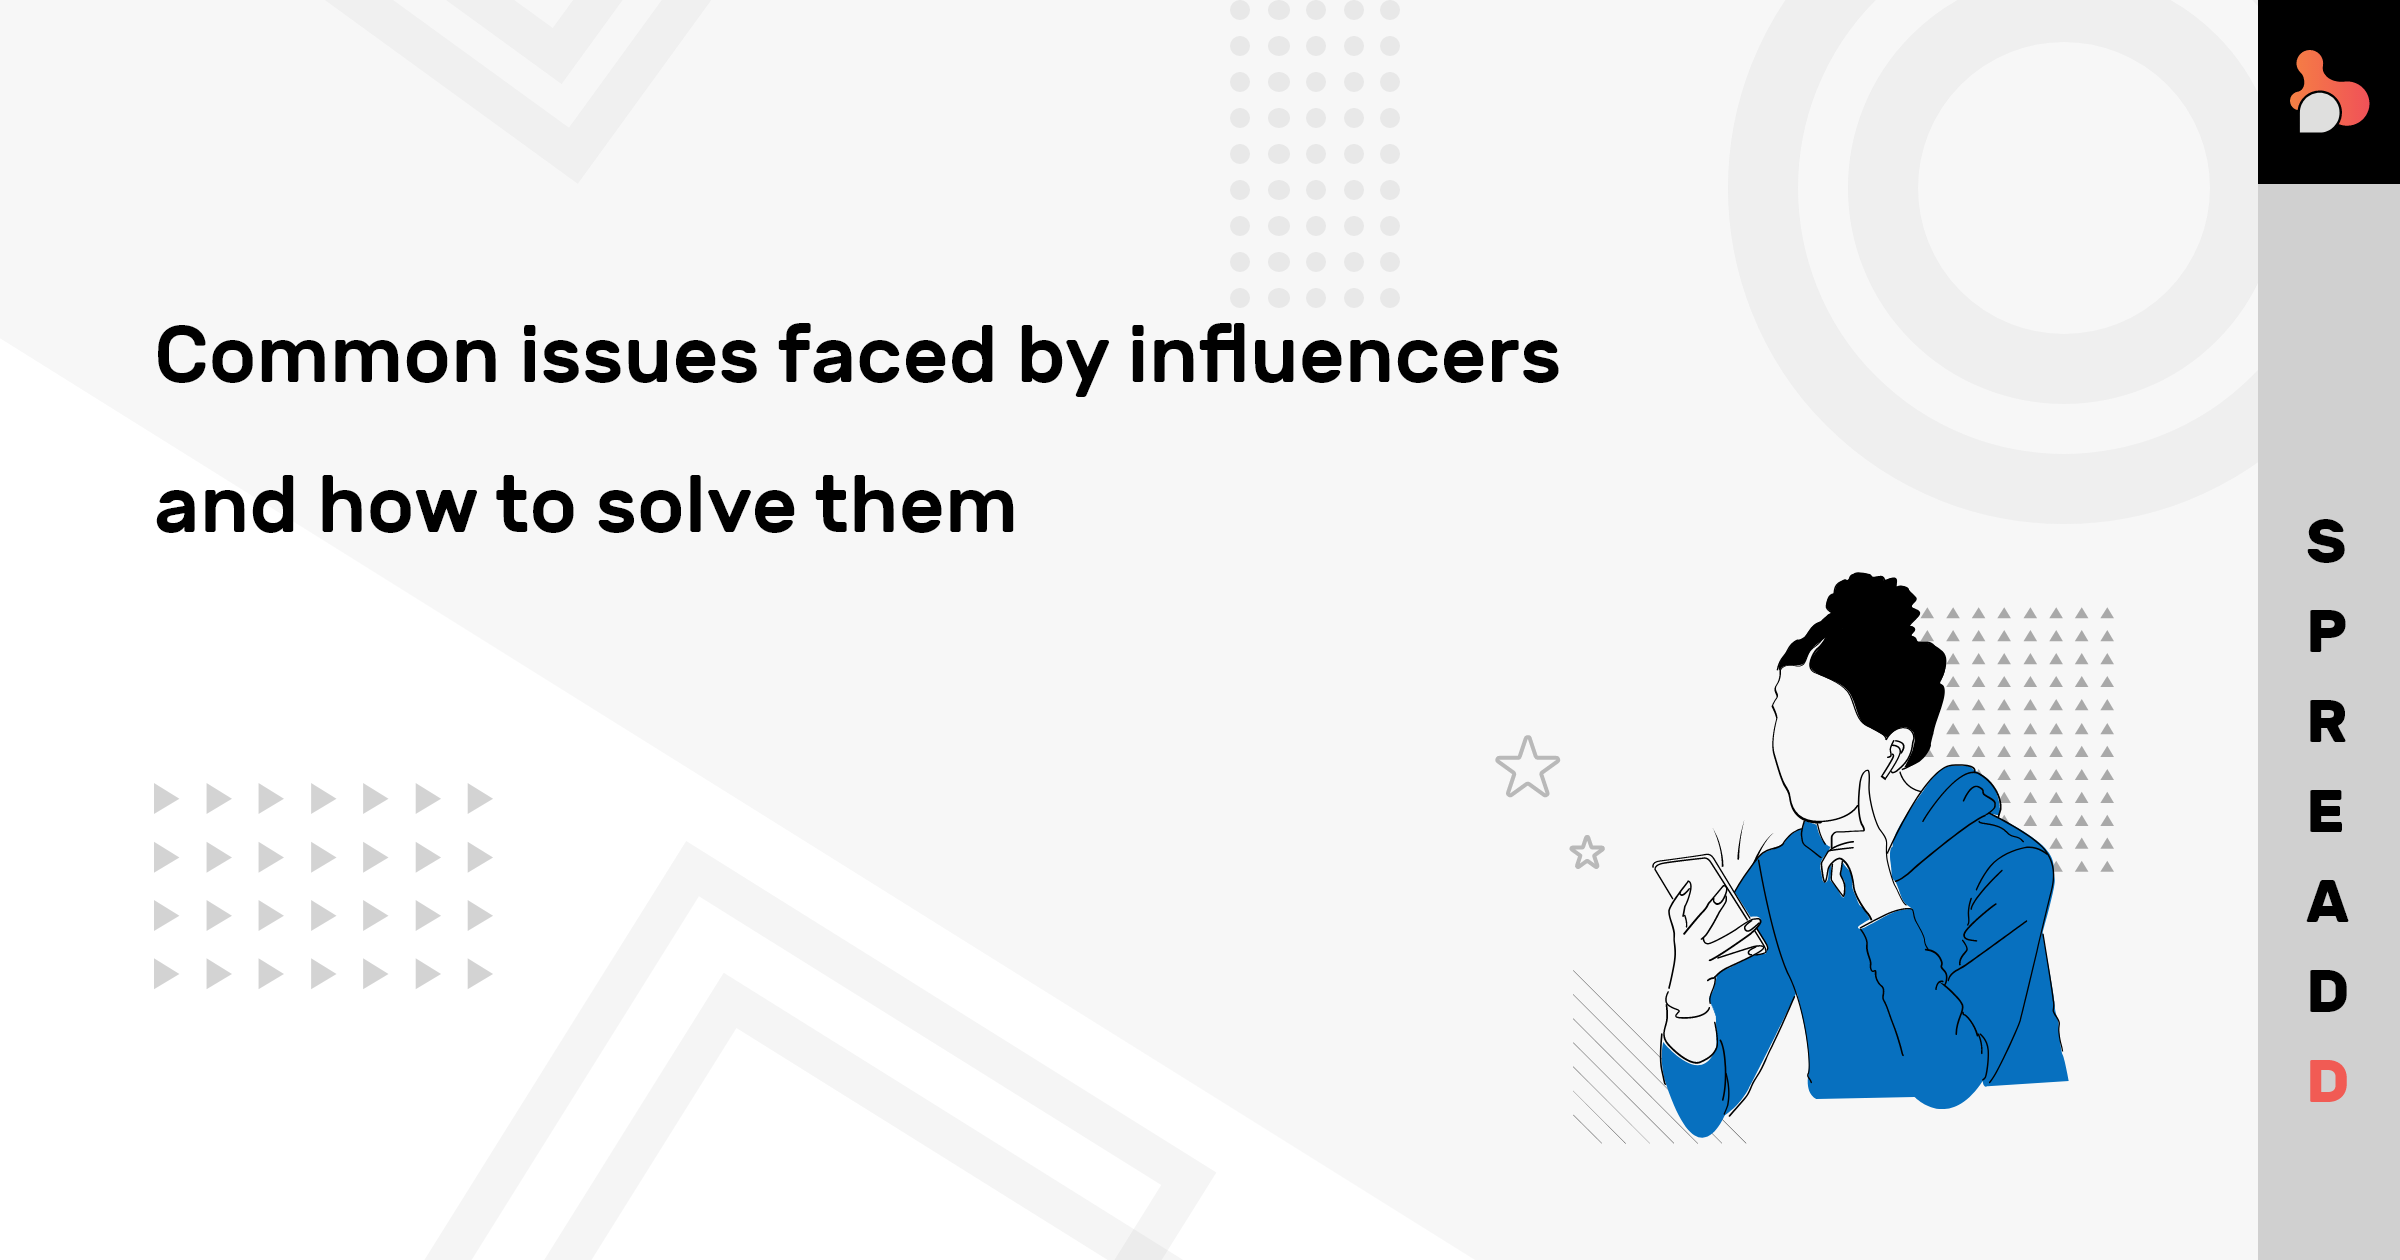 Common Issues Faced by Influencers, How to Solve Them